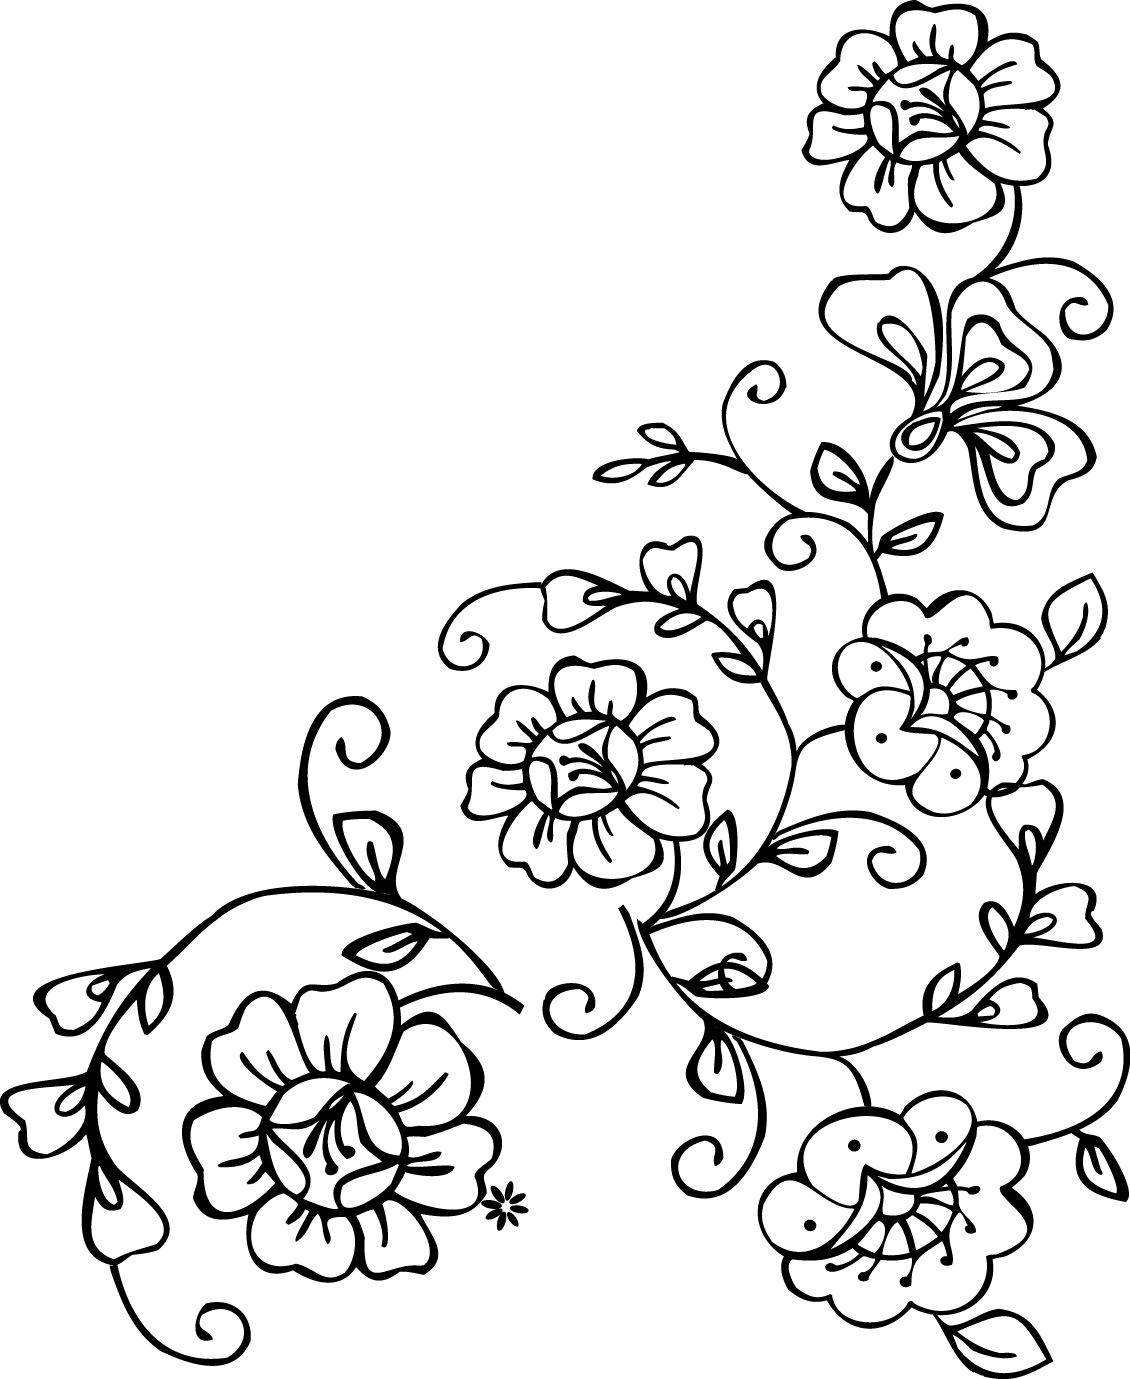 5-best-images-of-printable-paisley-stencil-designs-free-printable